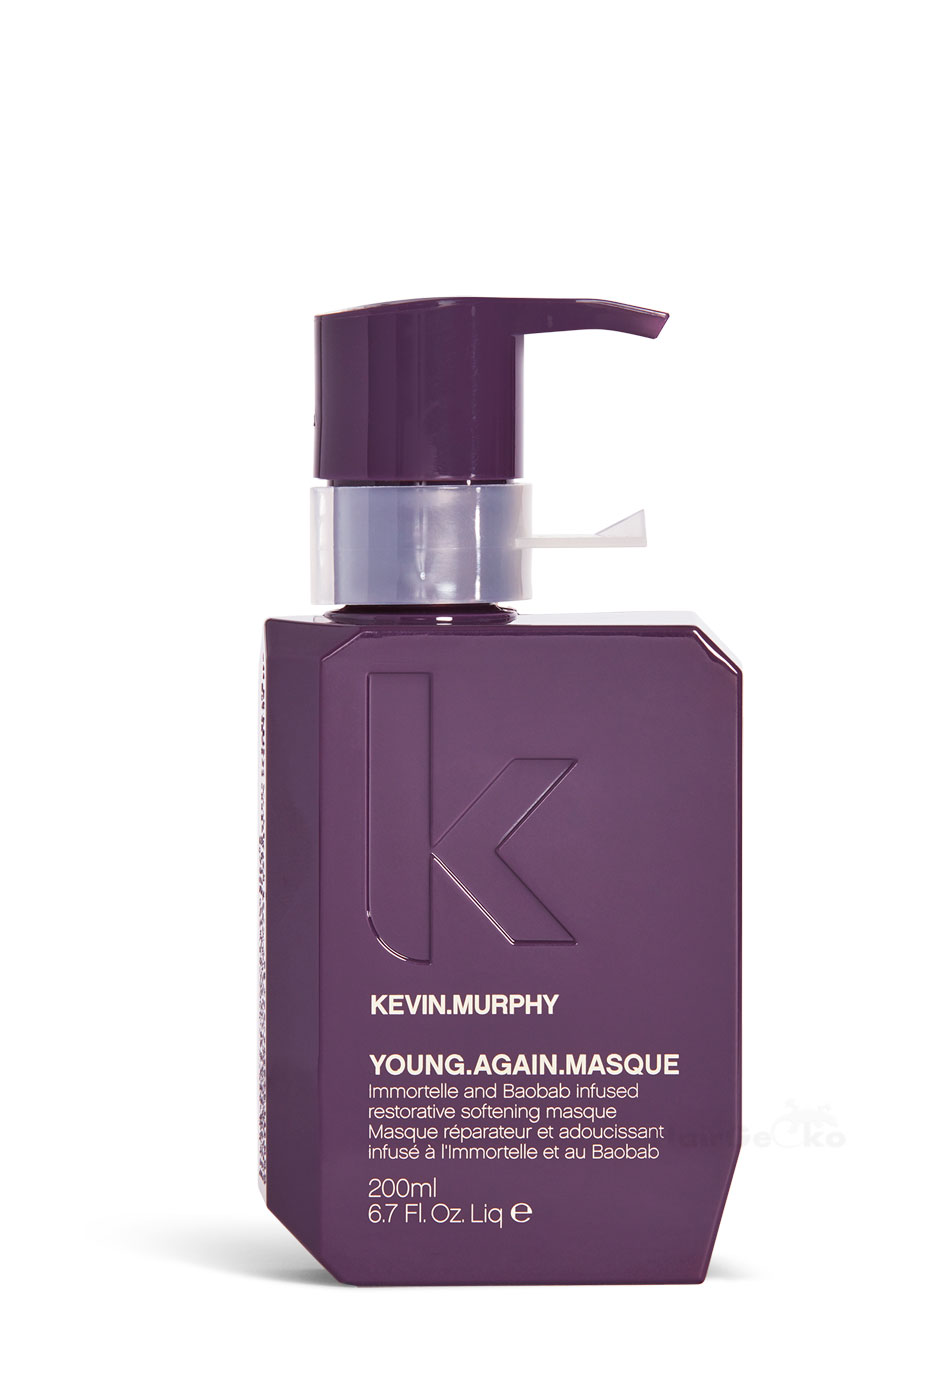 KEVIN.MURPHY YOUNG.AGAIN MASQUE 200 ml